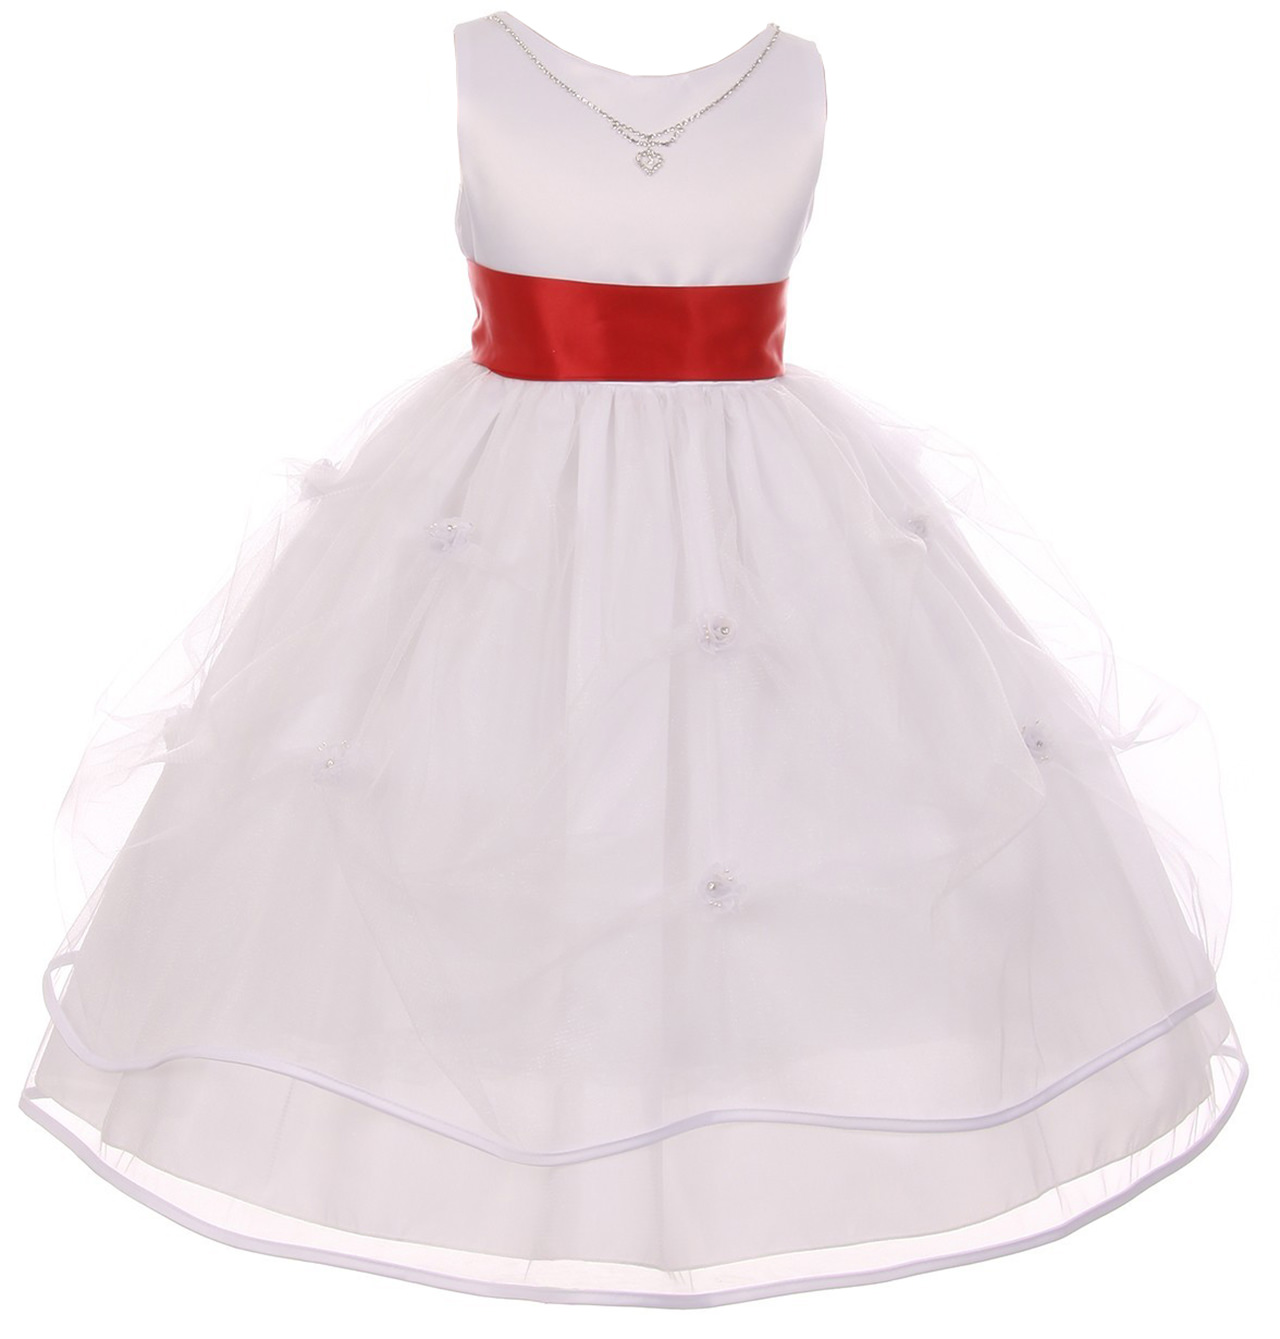 Big Girls' Sleeveless Crystal Necklace Tulle Pageant Communion Flower Girl Dress Red 10 (C01B16W) - image 1 of 3